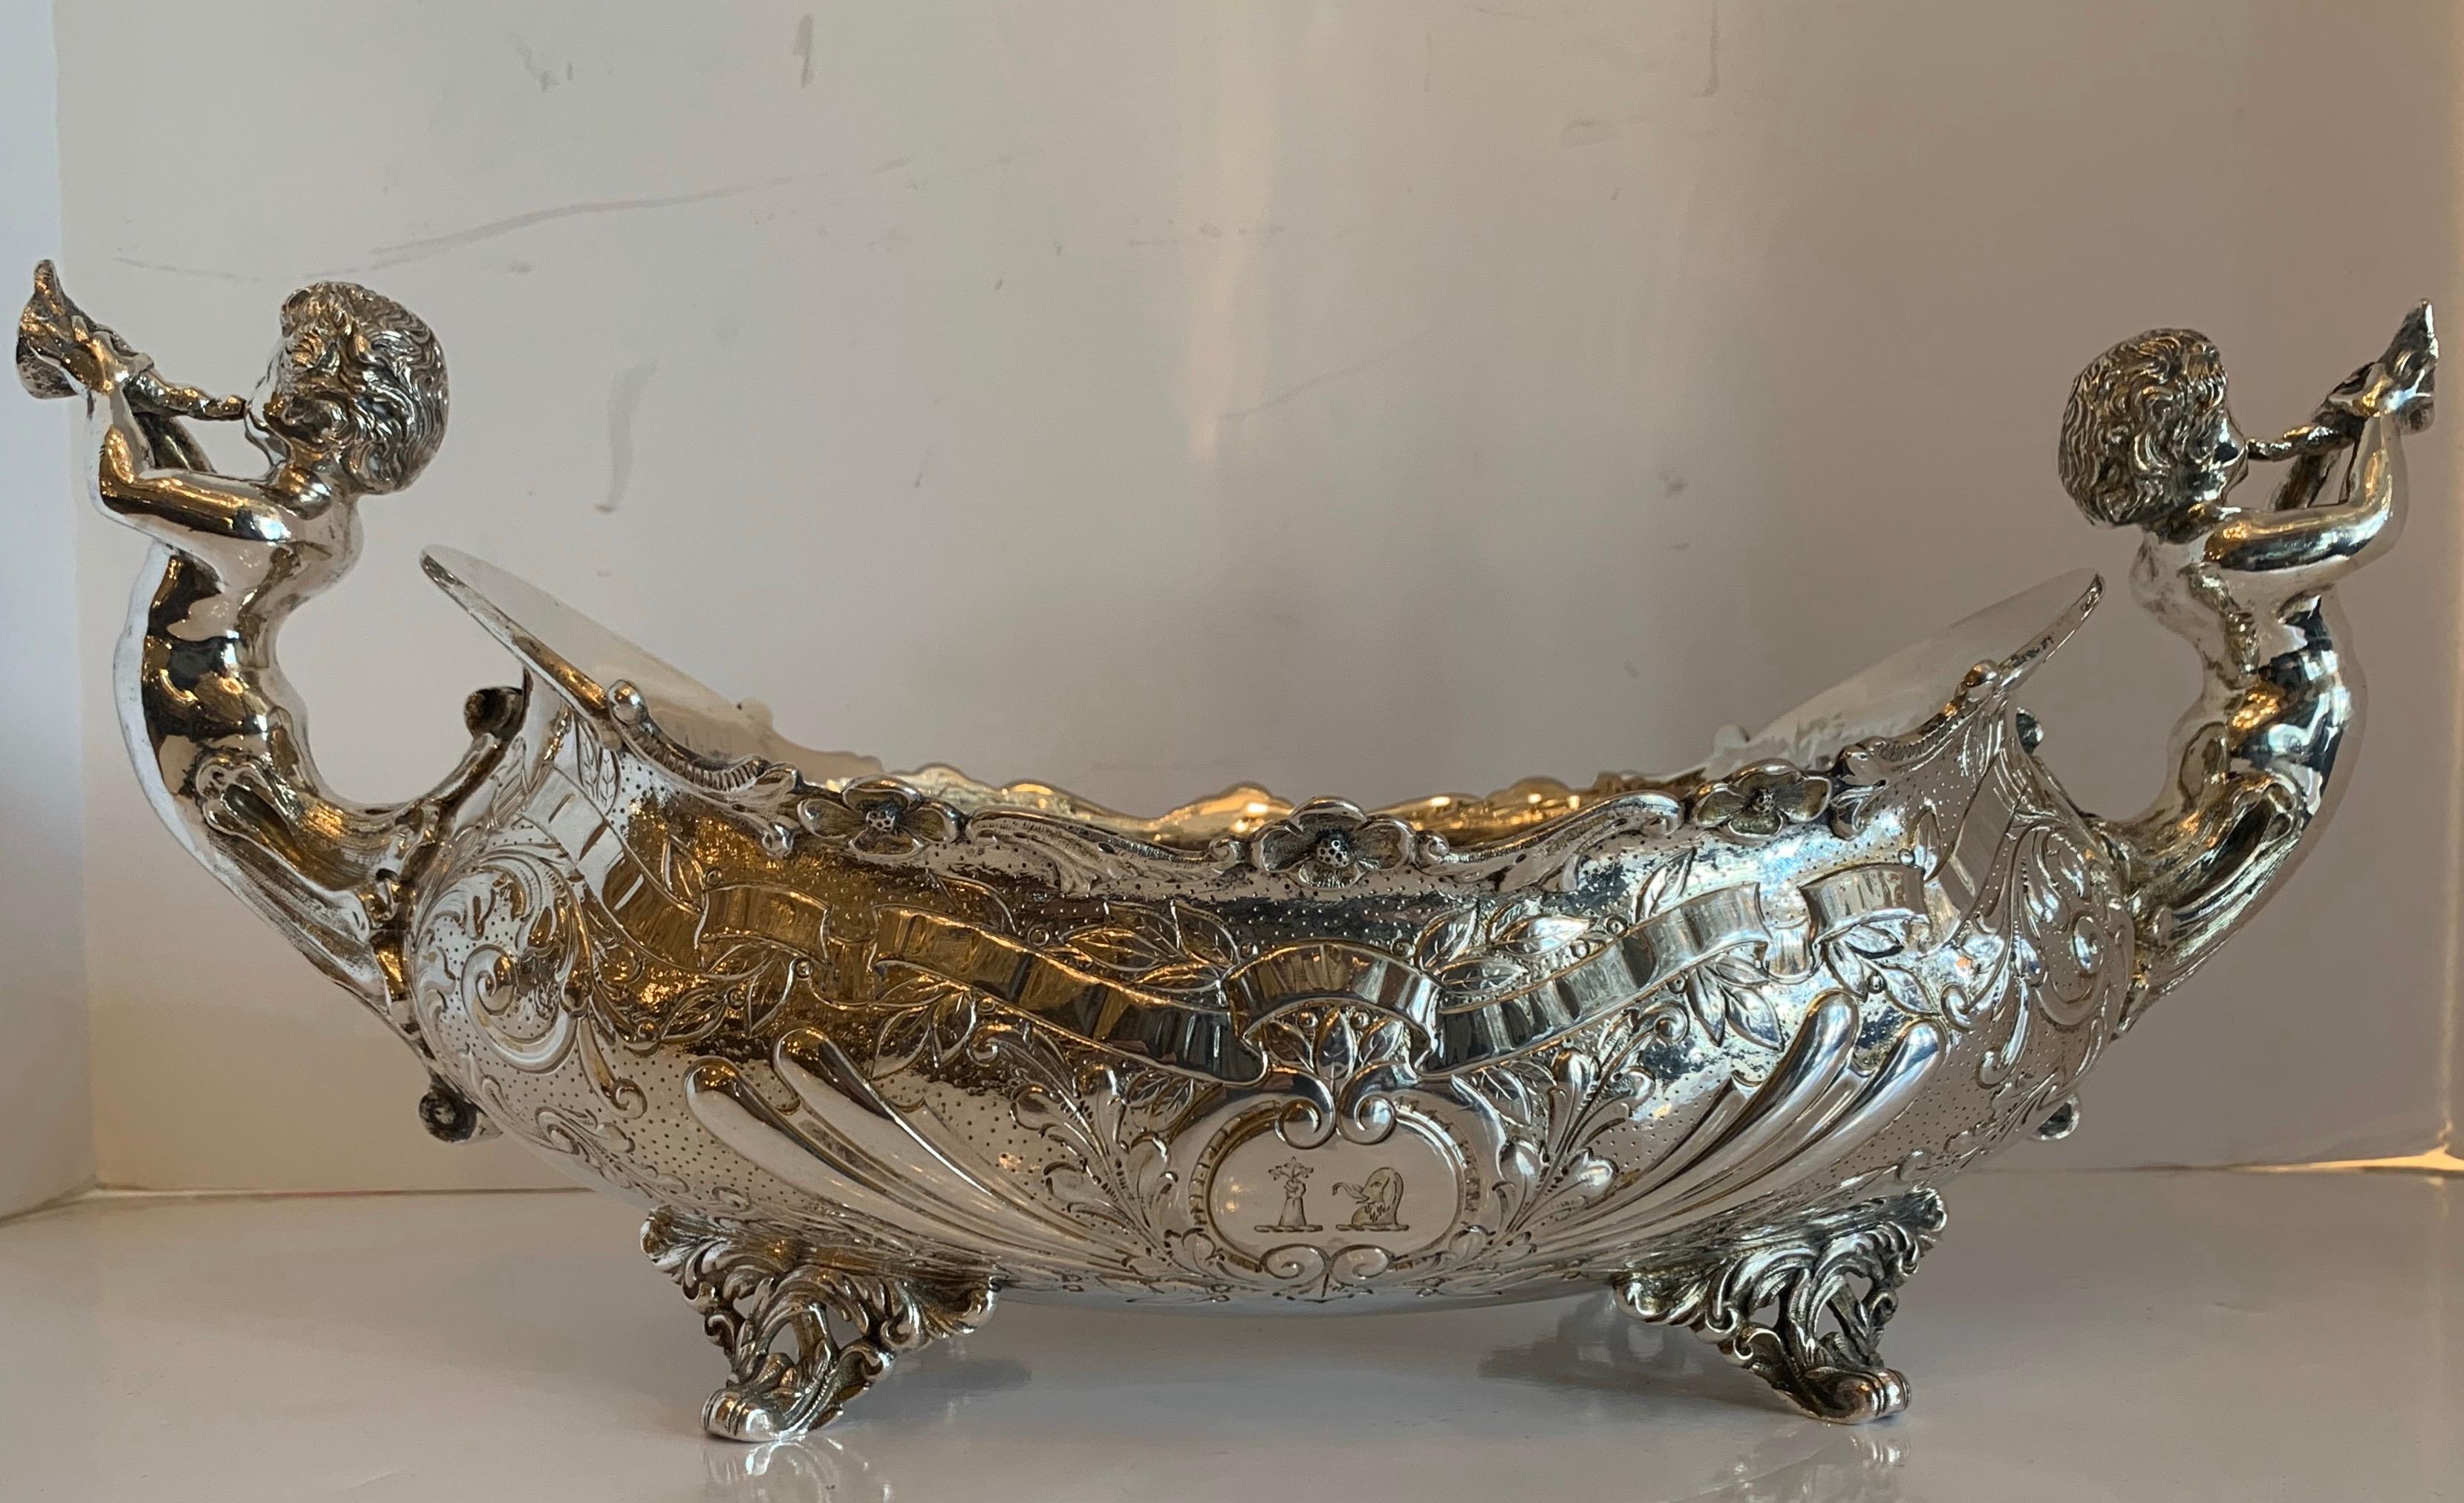 A Fine English Sterling Silver With Hallmarks, Cherub / Putti Horn Playing Blowing Handle Large Footed Centerpiece
17